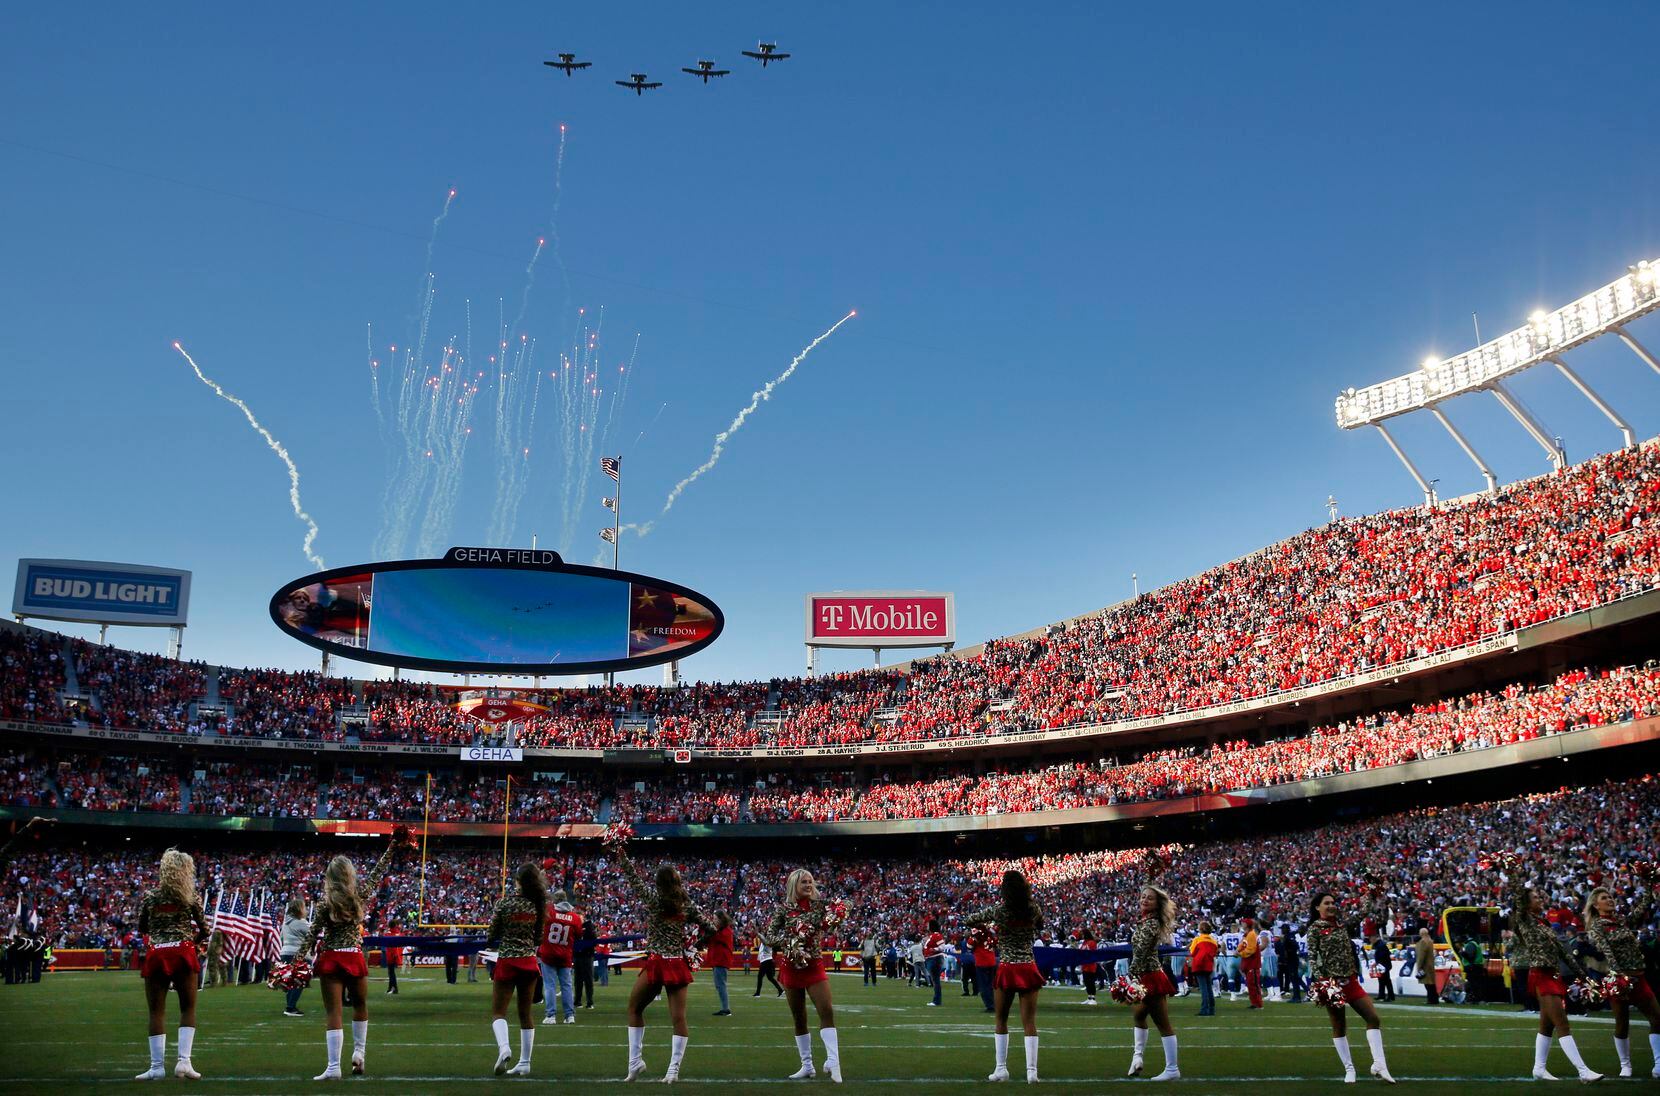 A group of A-10 military jets perform a flyover of Arrowhead Stadium before the Dallas Cowboys game in Kansas City, Missouri, November 21, 2021. (Tom Fox/The Dallas Morning News)